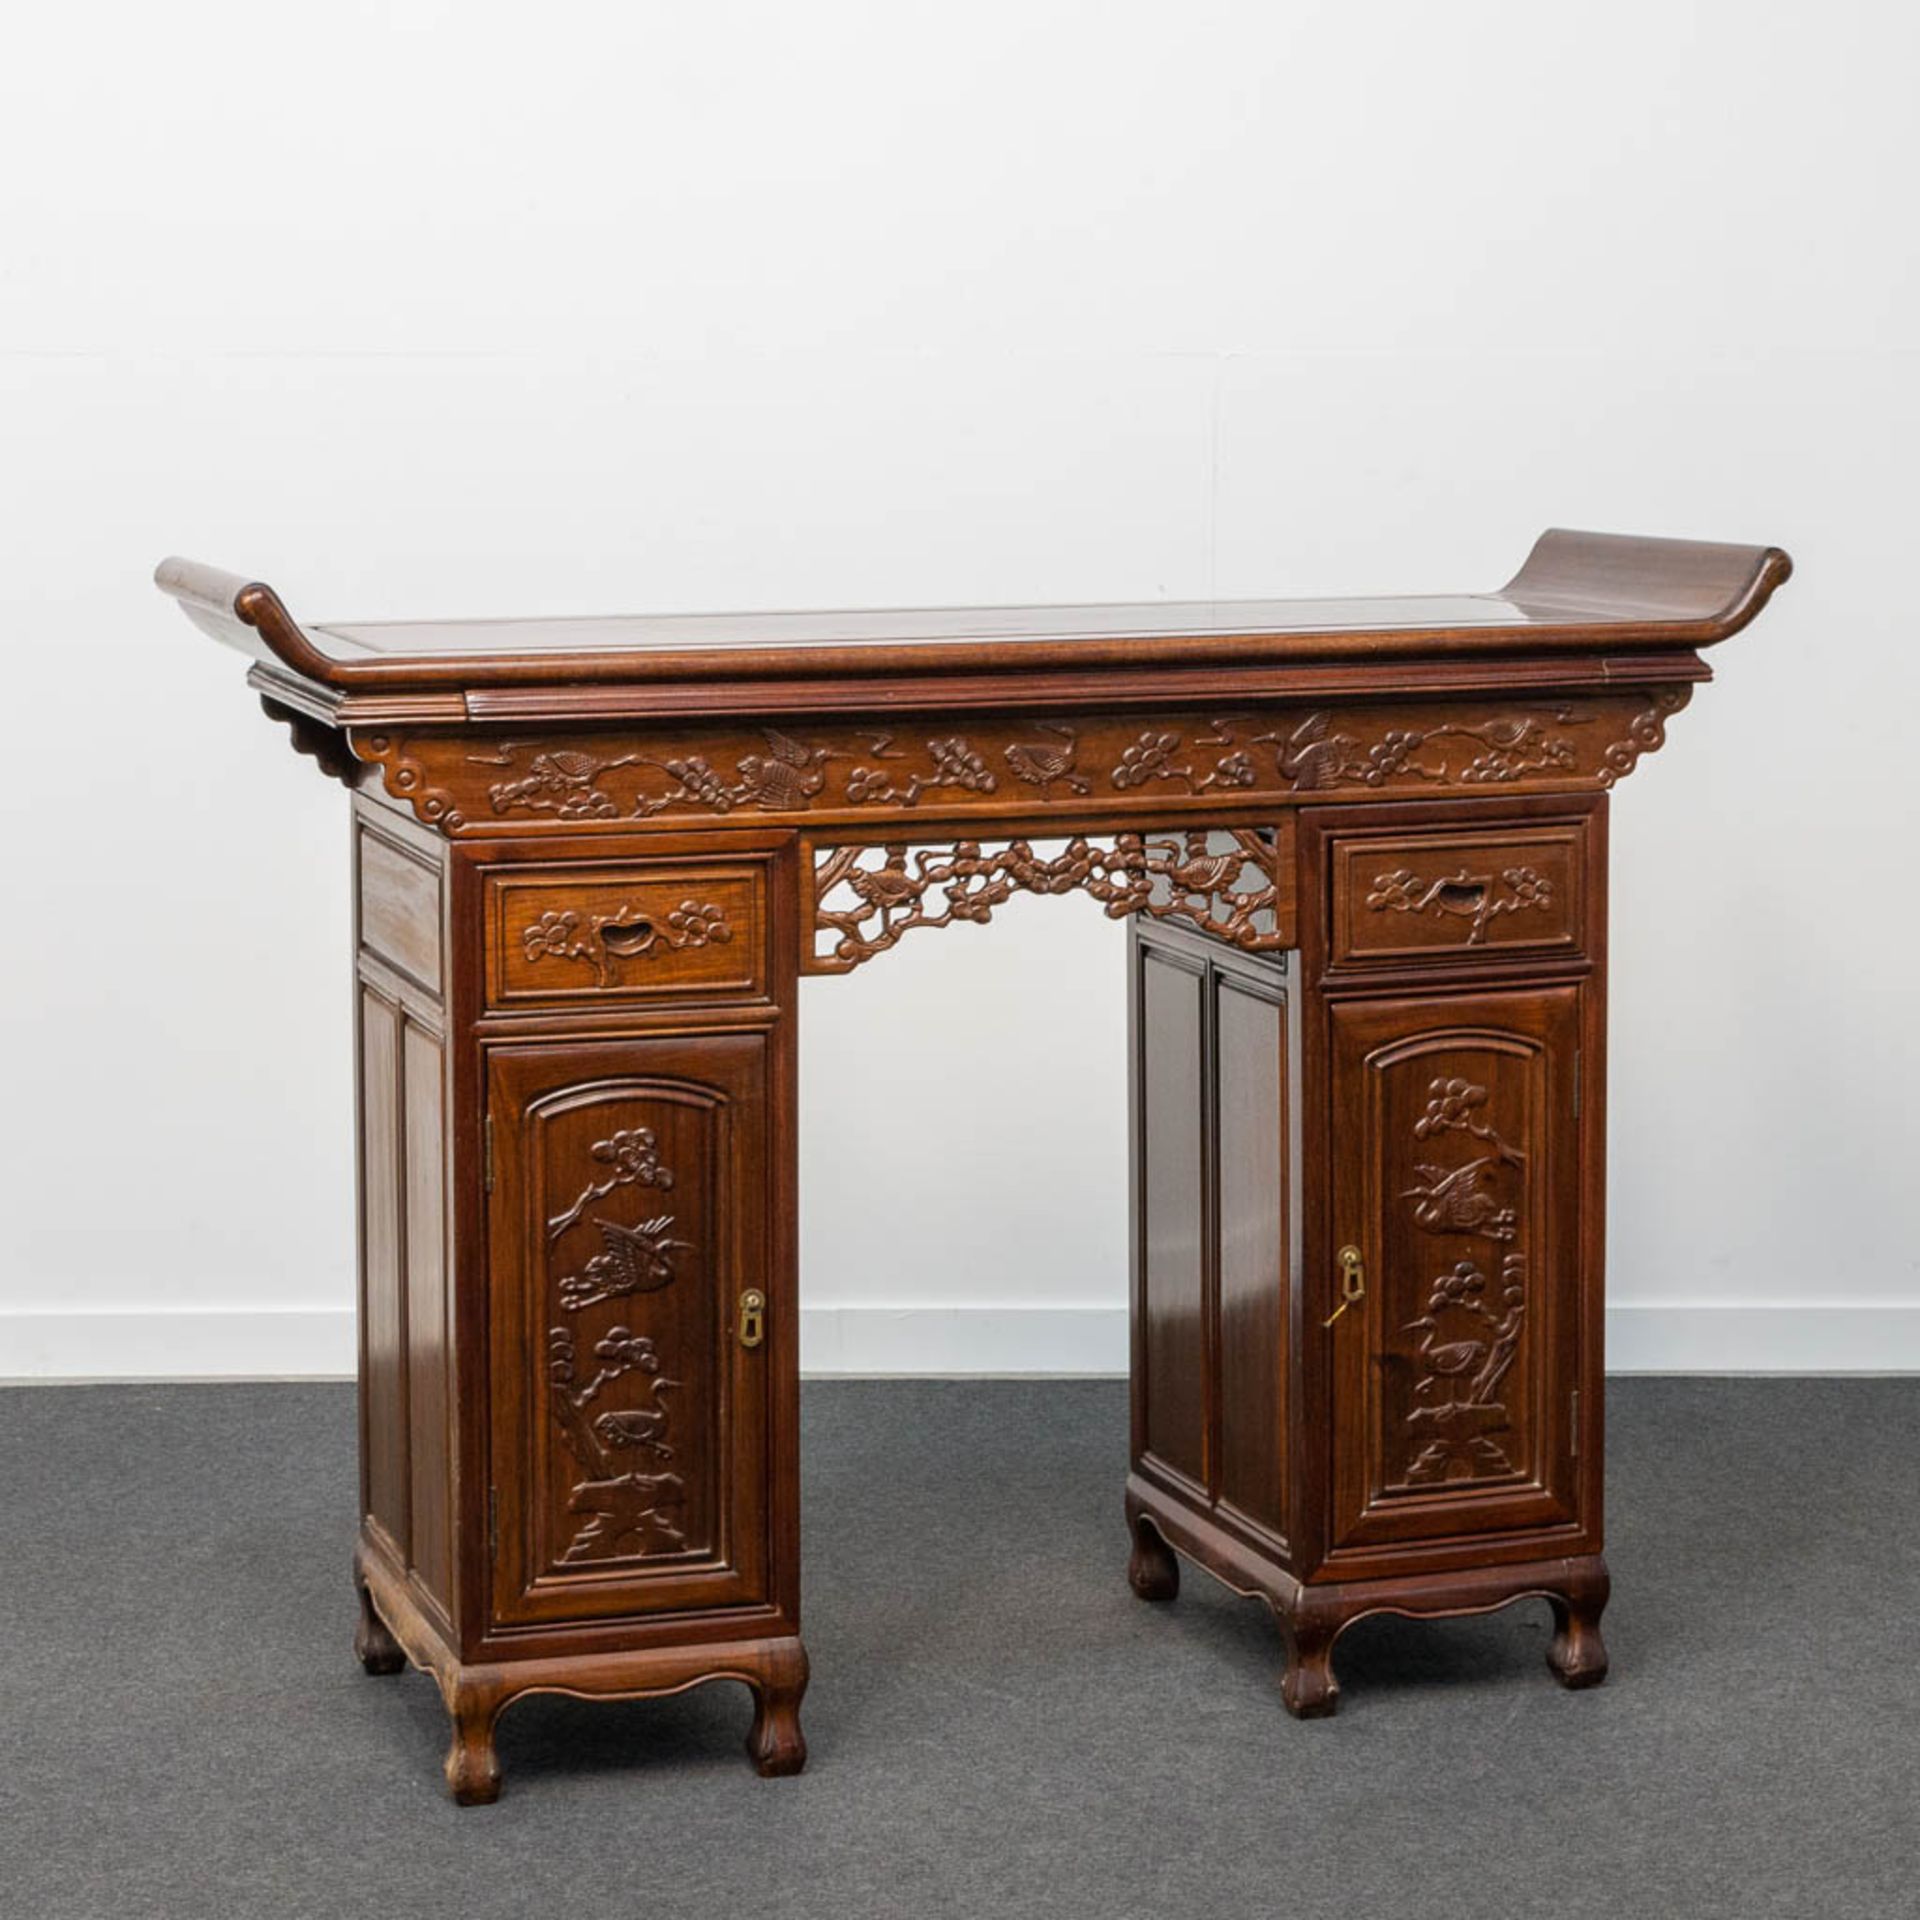 A Chinese hardwood Scroll Desk